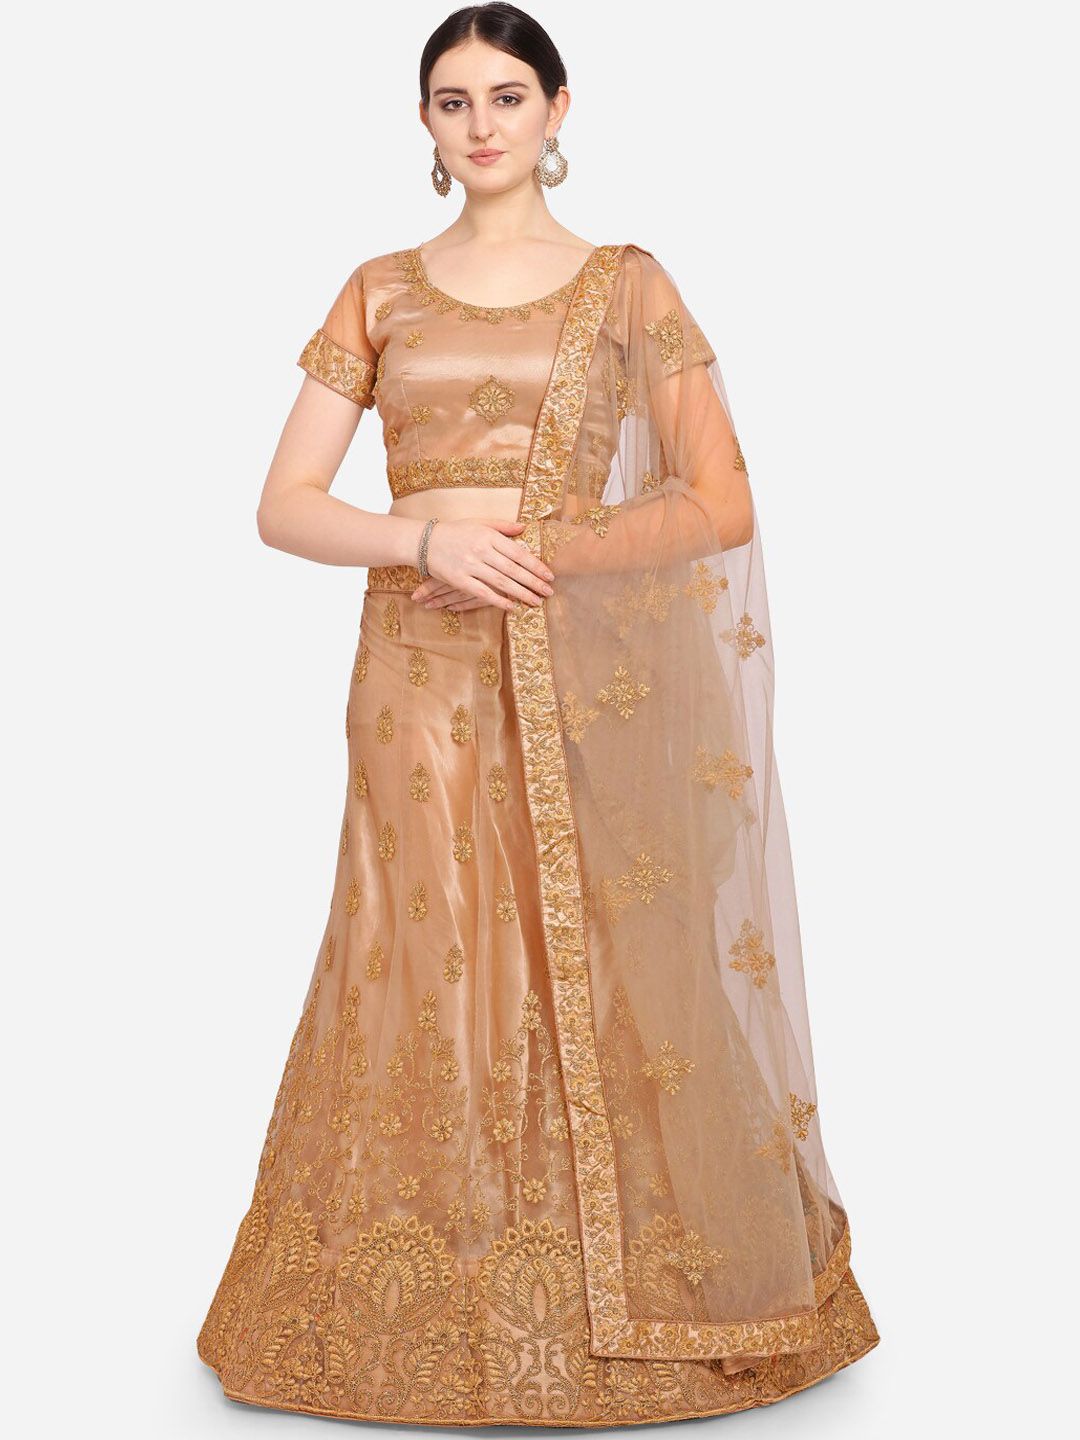 VRSALES Peach-Coloured Semi-Stitched Lehenga & Blouse with Dupatta Price in India